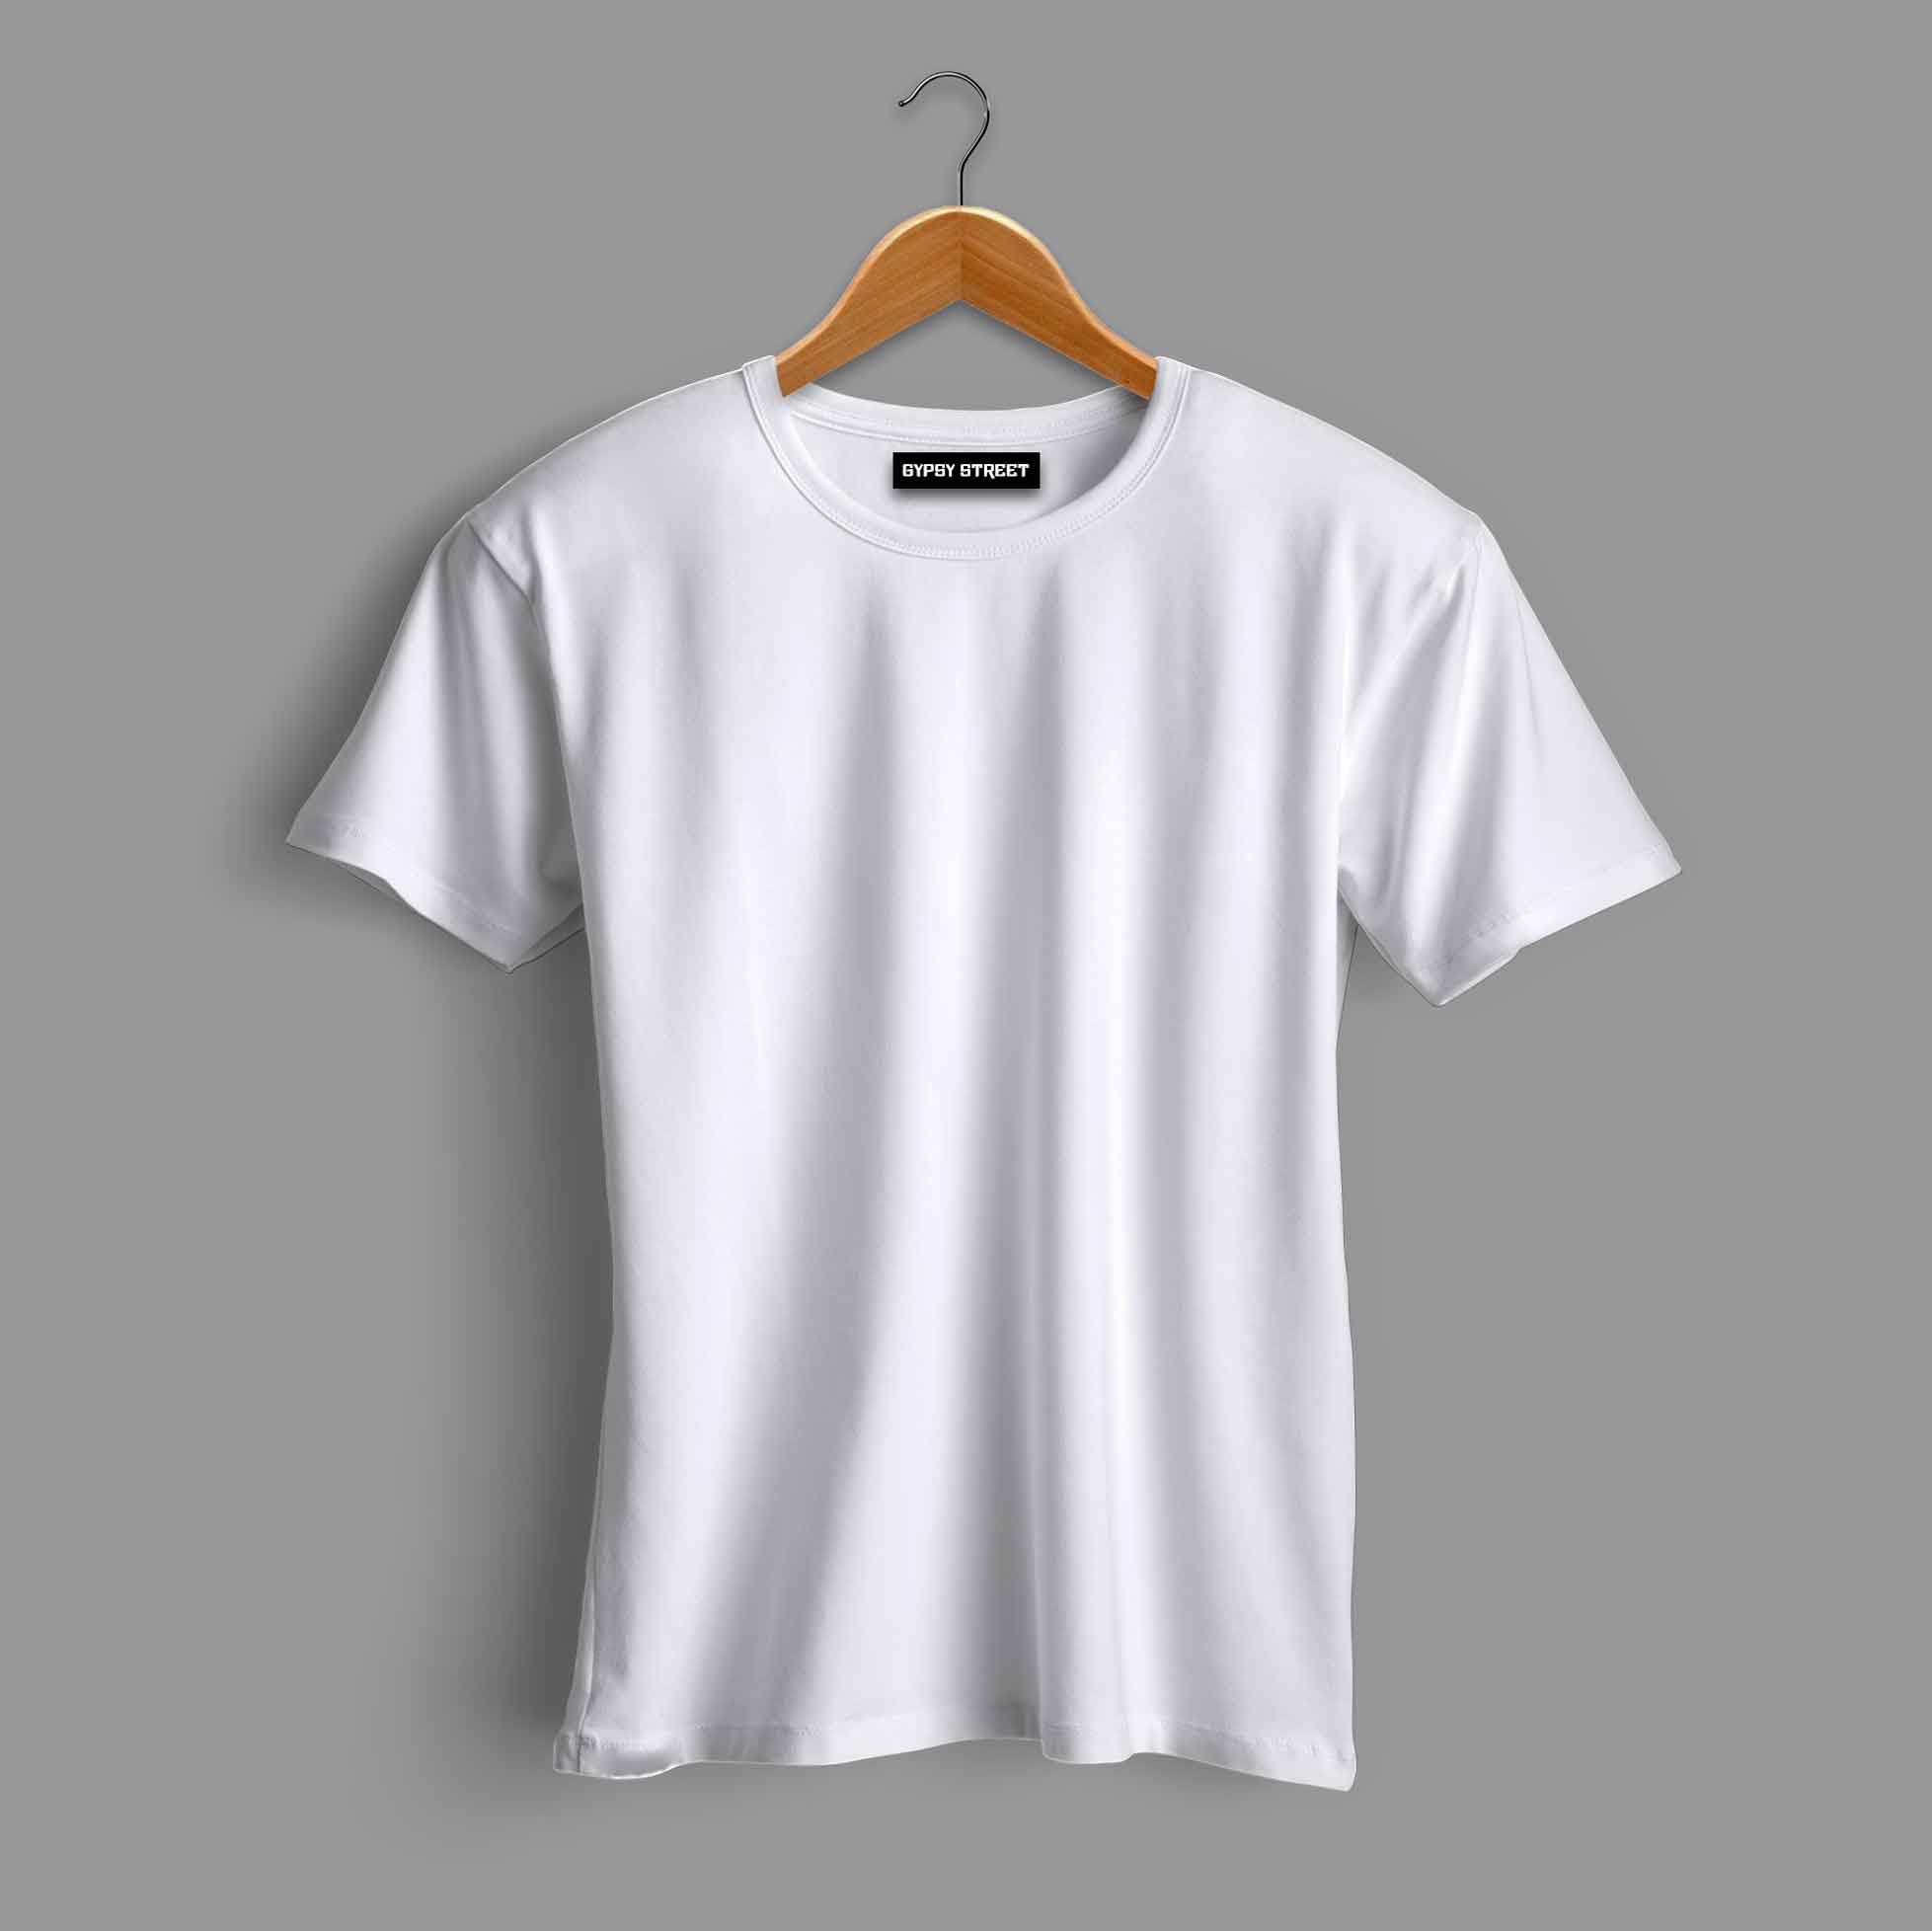 Frosty White T-Shirt Solid Collection For Women - Gypsy Street